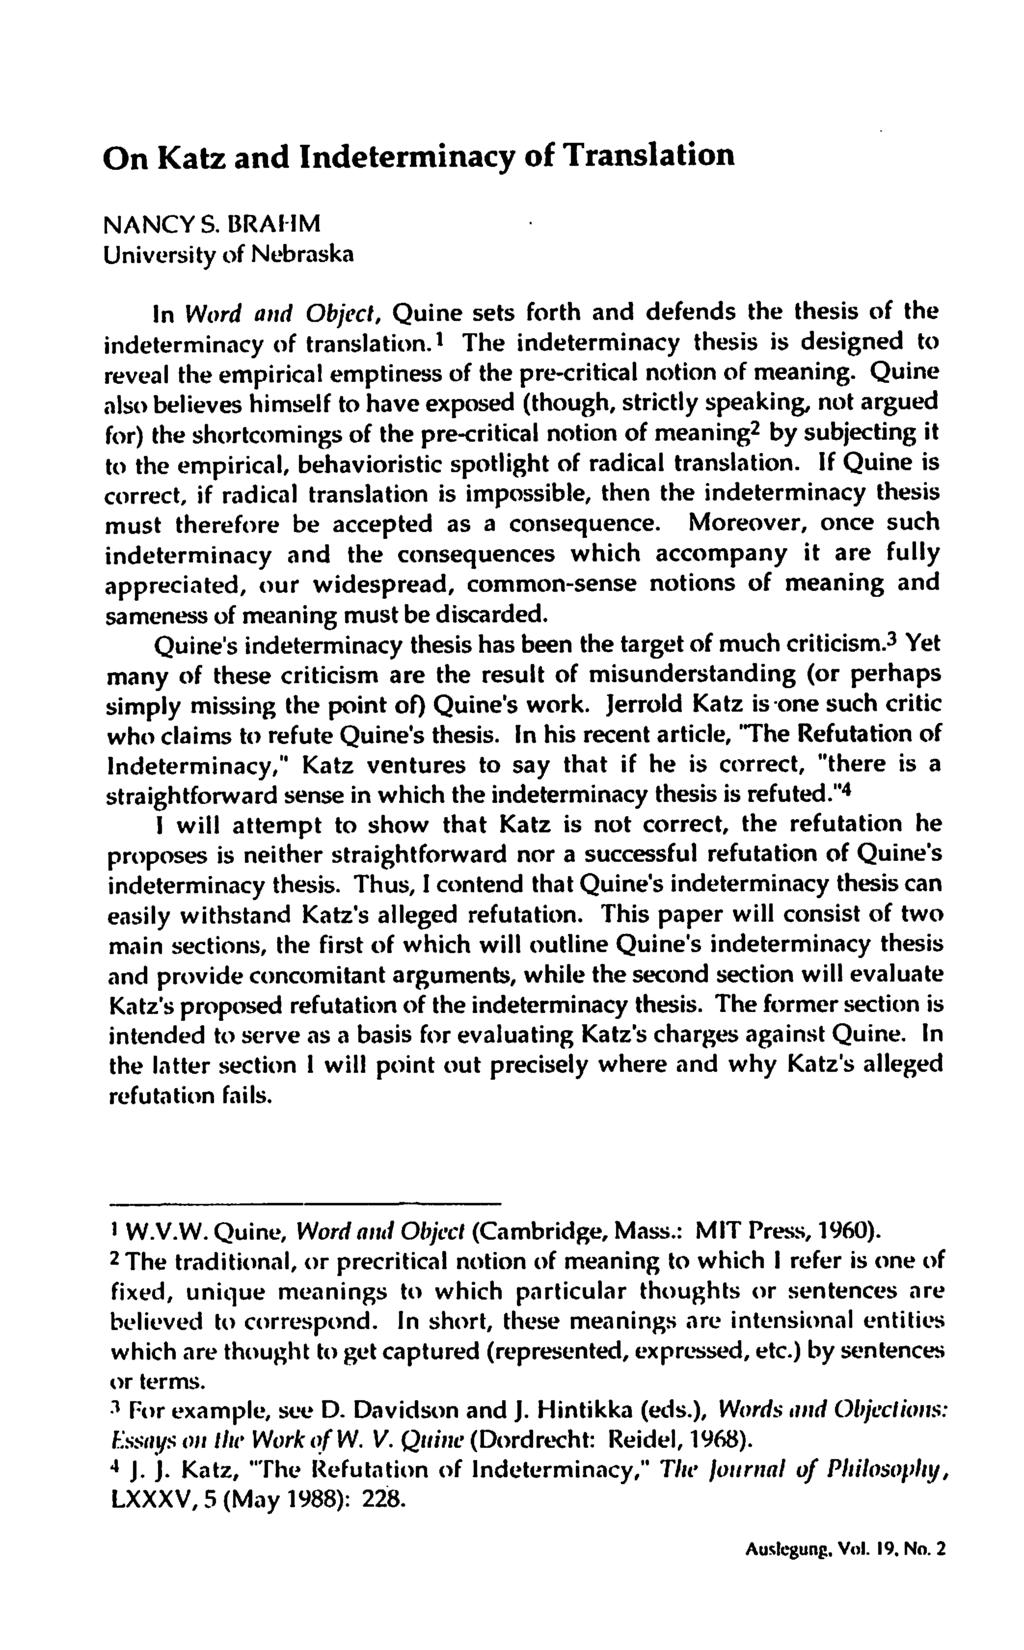 On Katz and Indeterminacy of Translation NANCYS. BRAHM University of Nebraska In Word and Object, Quine sets forth and defends the thesis of the indeterminacy of translation.